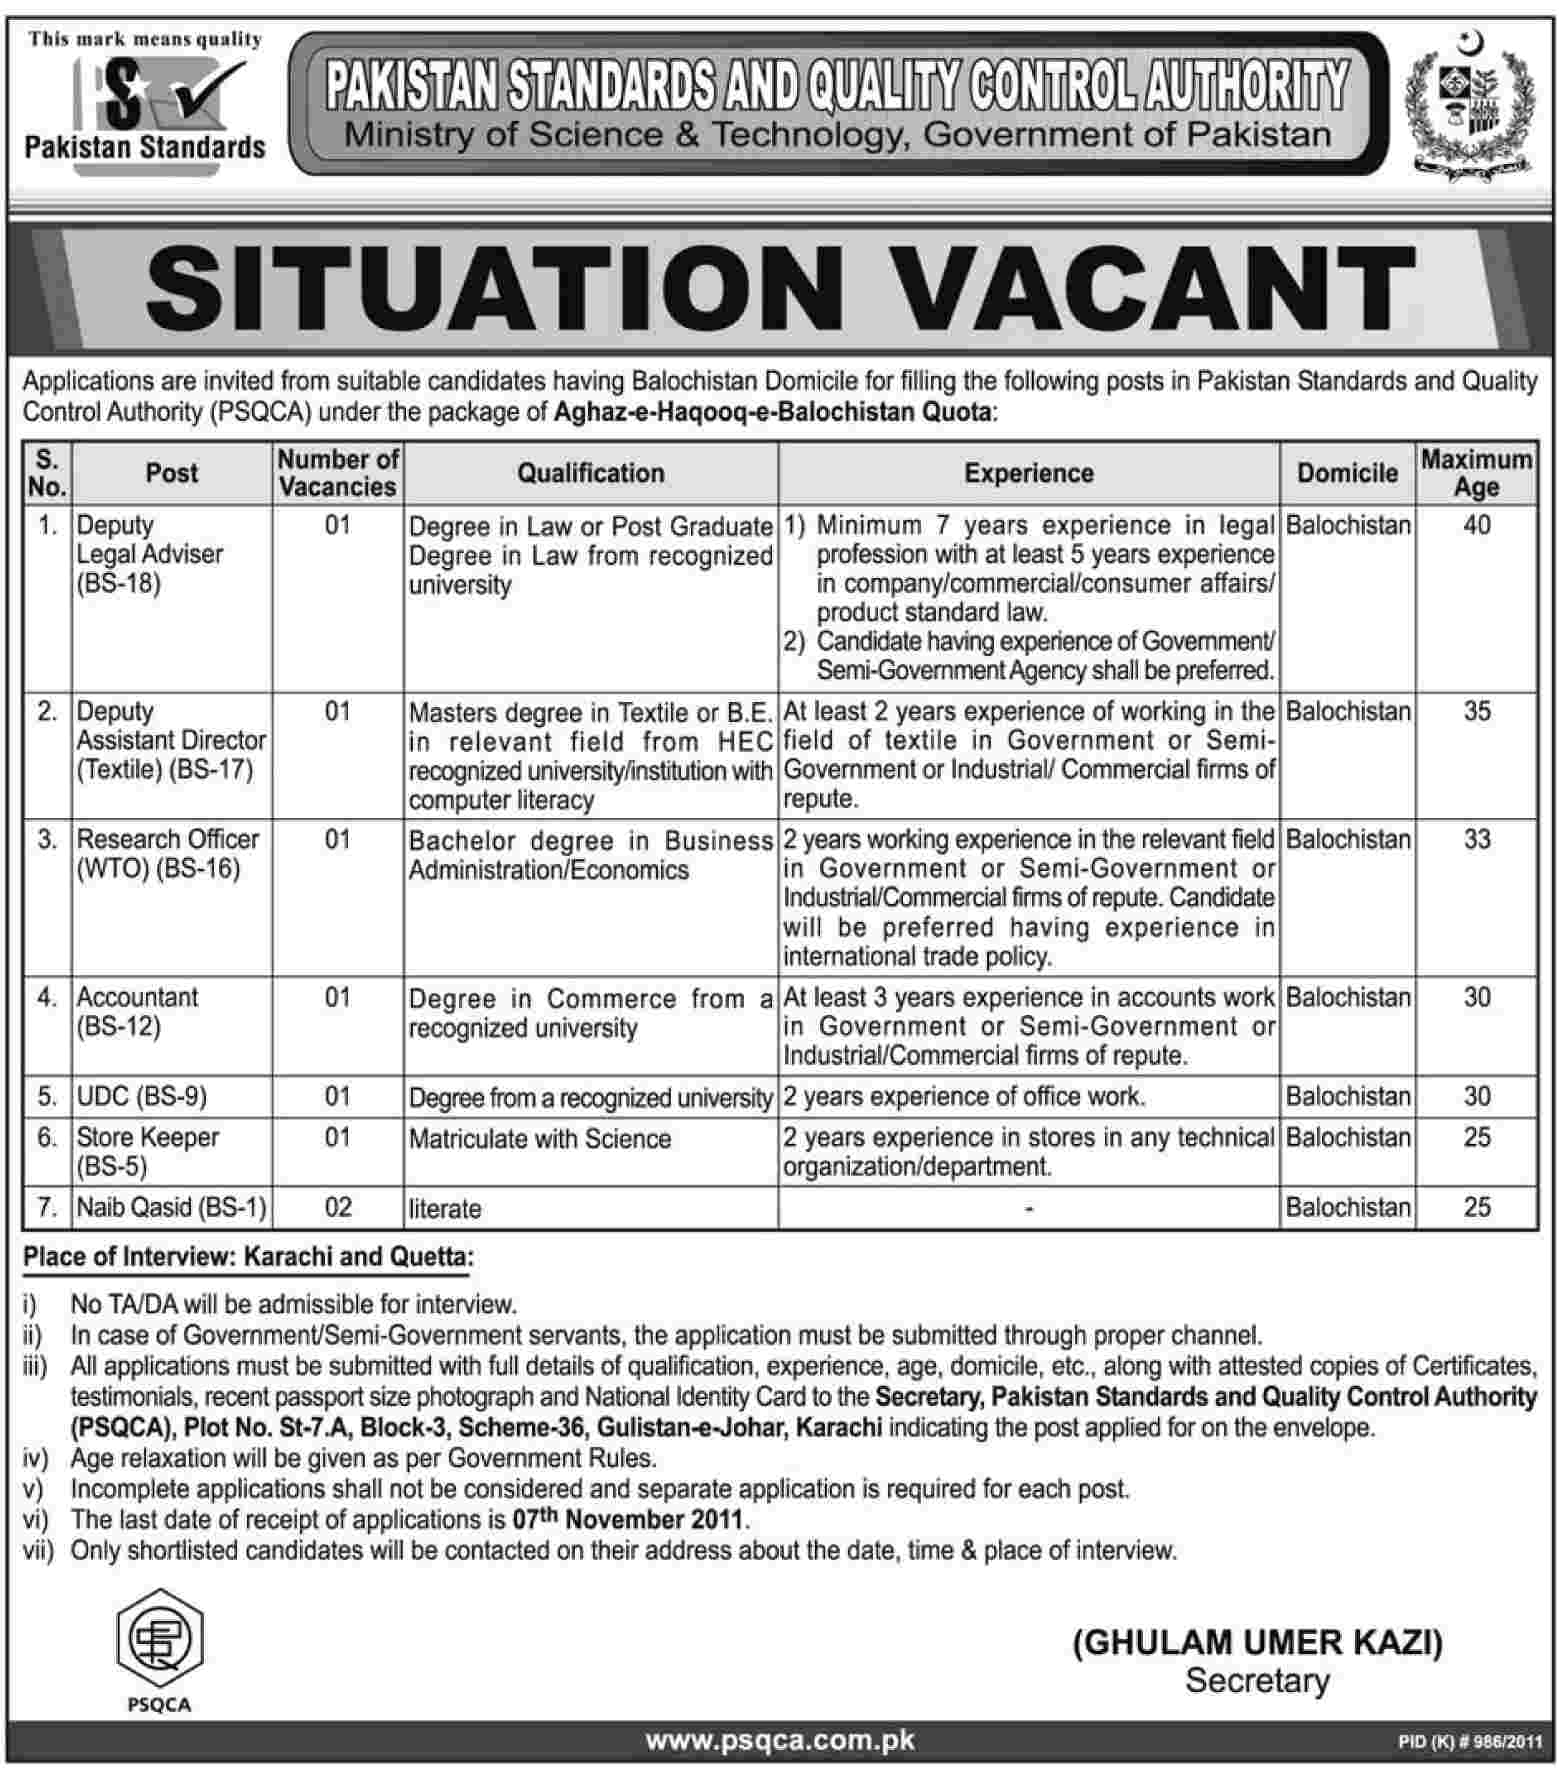 Pakistan Standards and Quality Control Authority, Jobs Opportunities